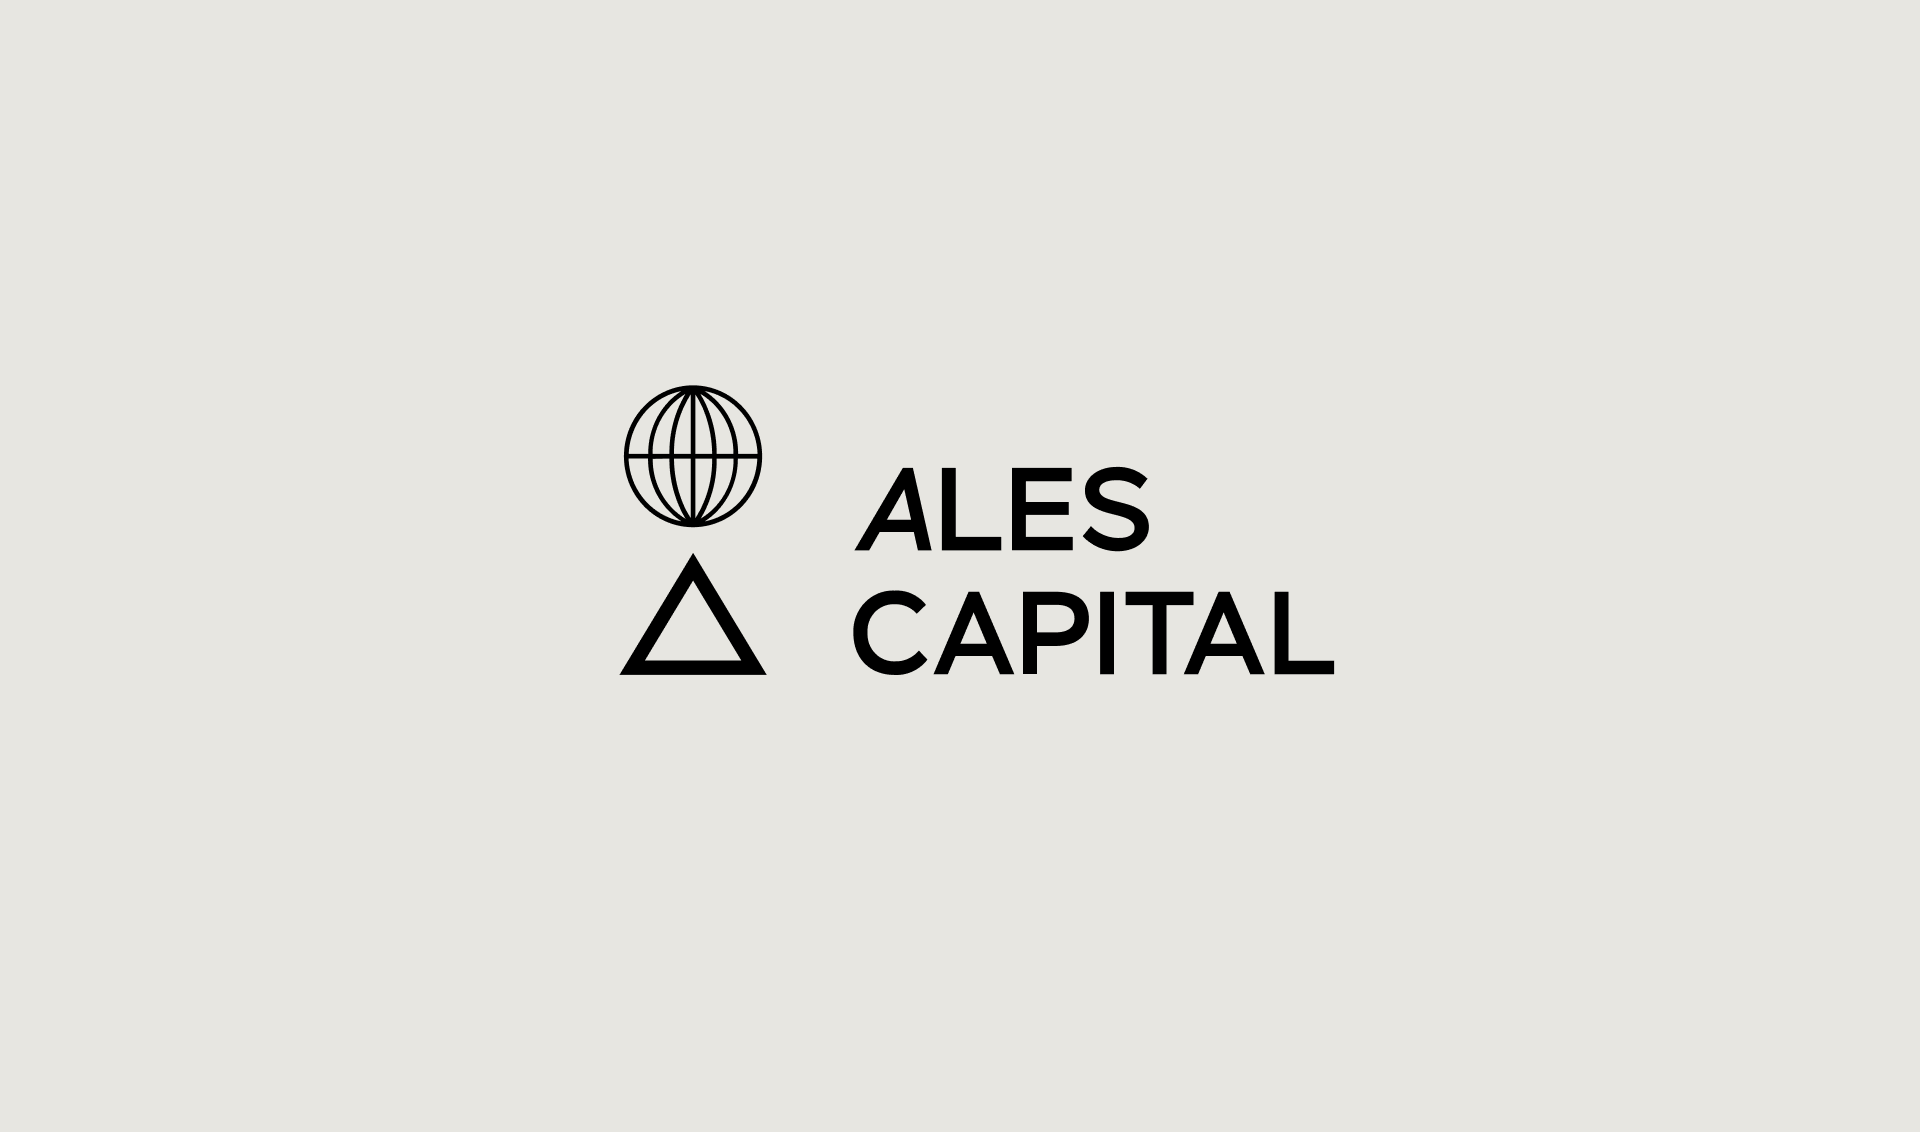 Ales Capital Group